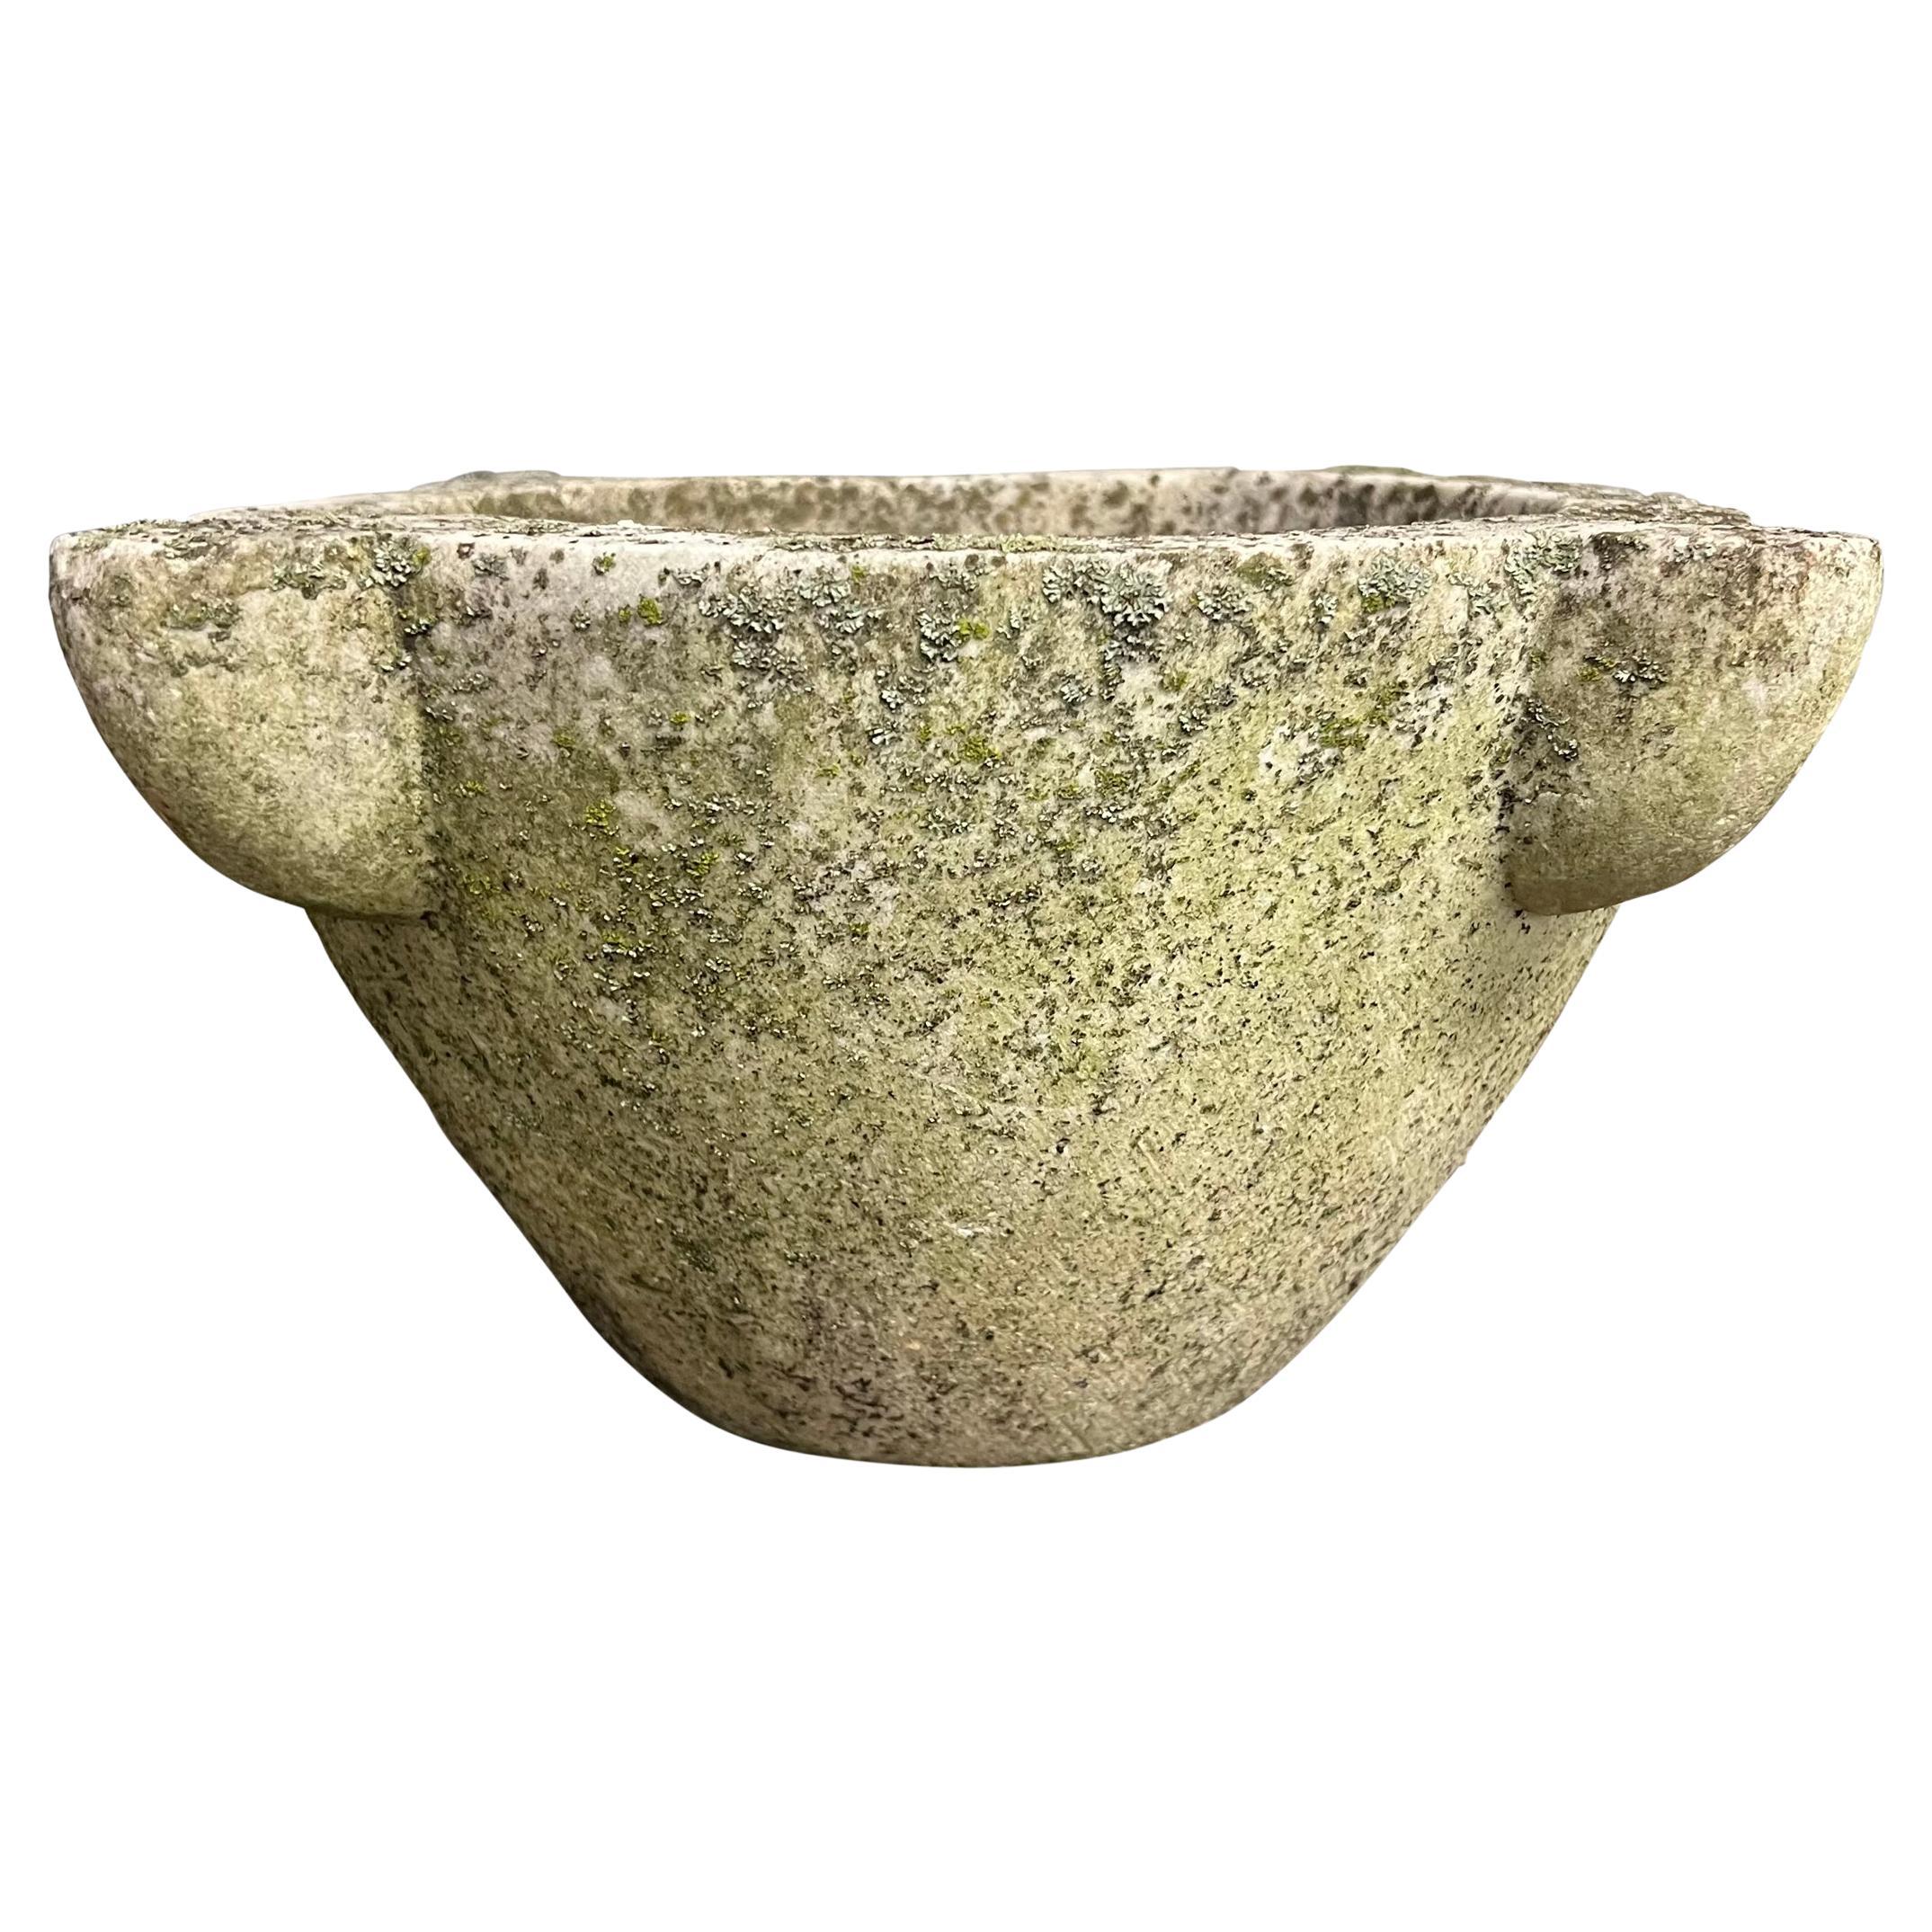 19th Century French Moss and Lichen Covered Marble Mortar For Sale